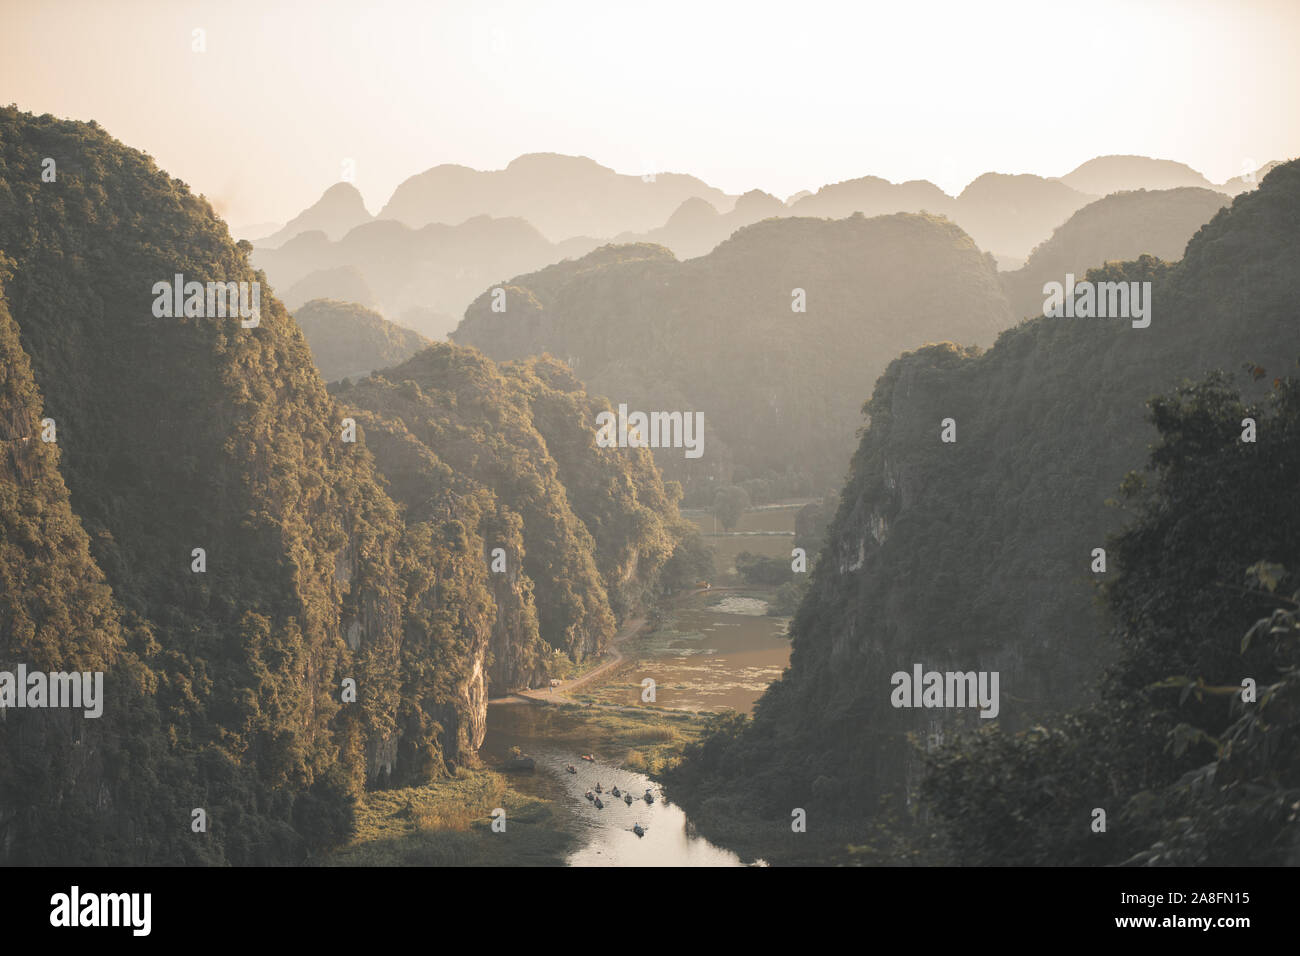 Beautiful sunset over Vietnamese rivers and Landscape from the scenic Mua Caves and Dragon Statue in Tam Coc, Ninh Binh, Vietnam Stock Photo